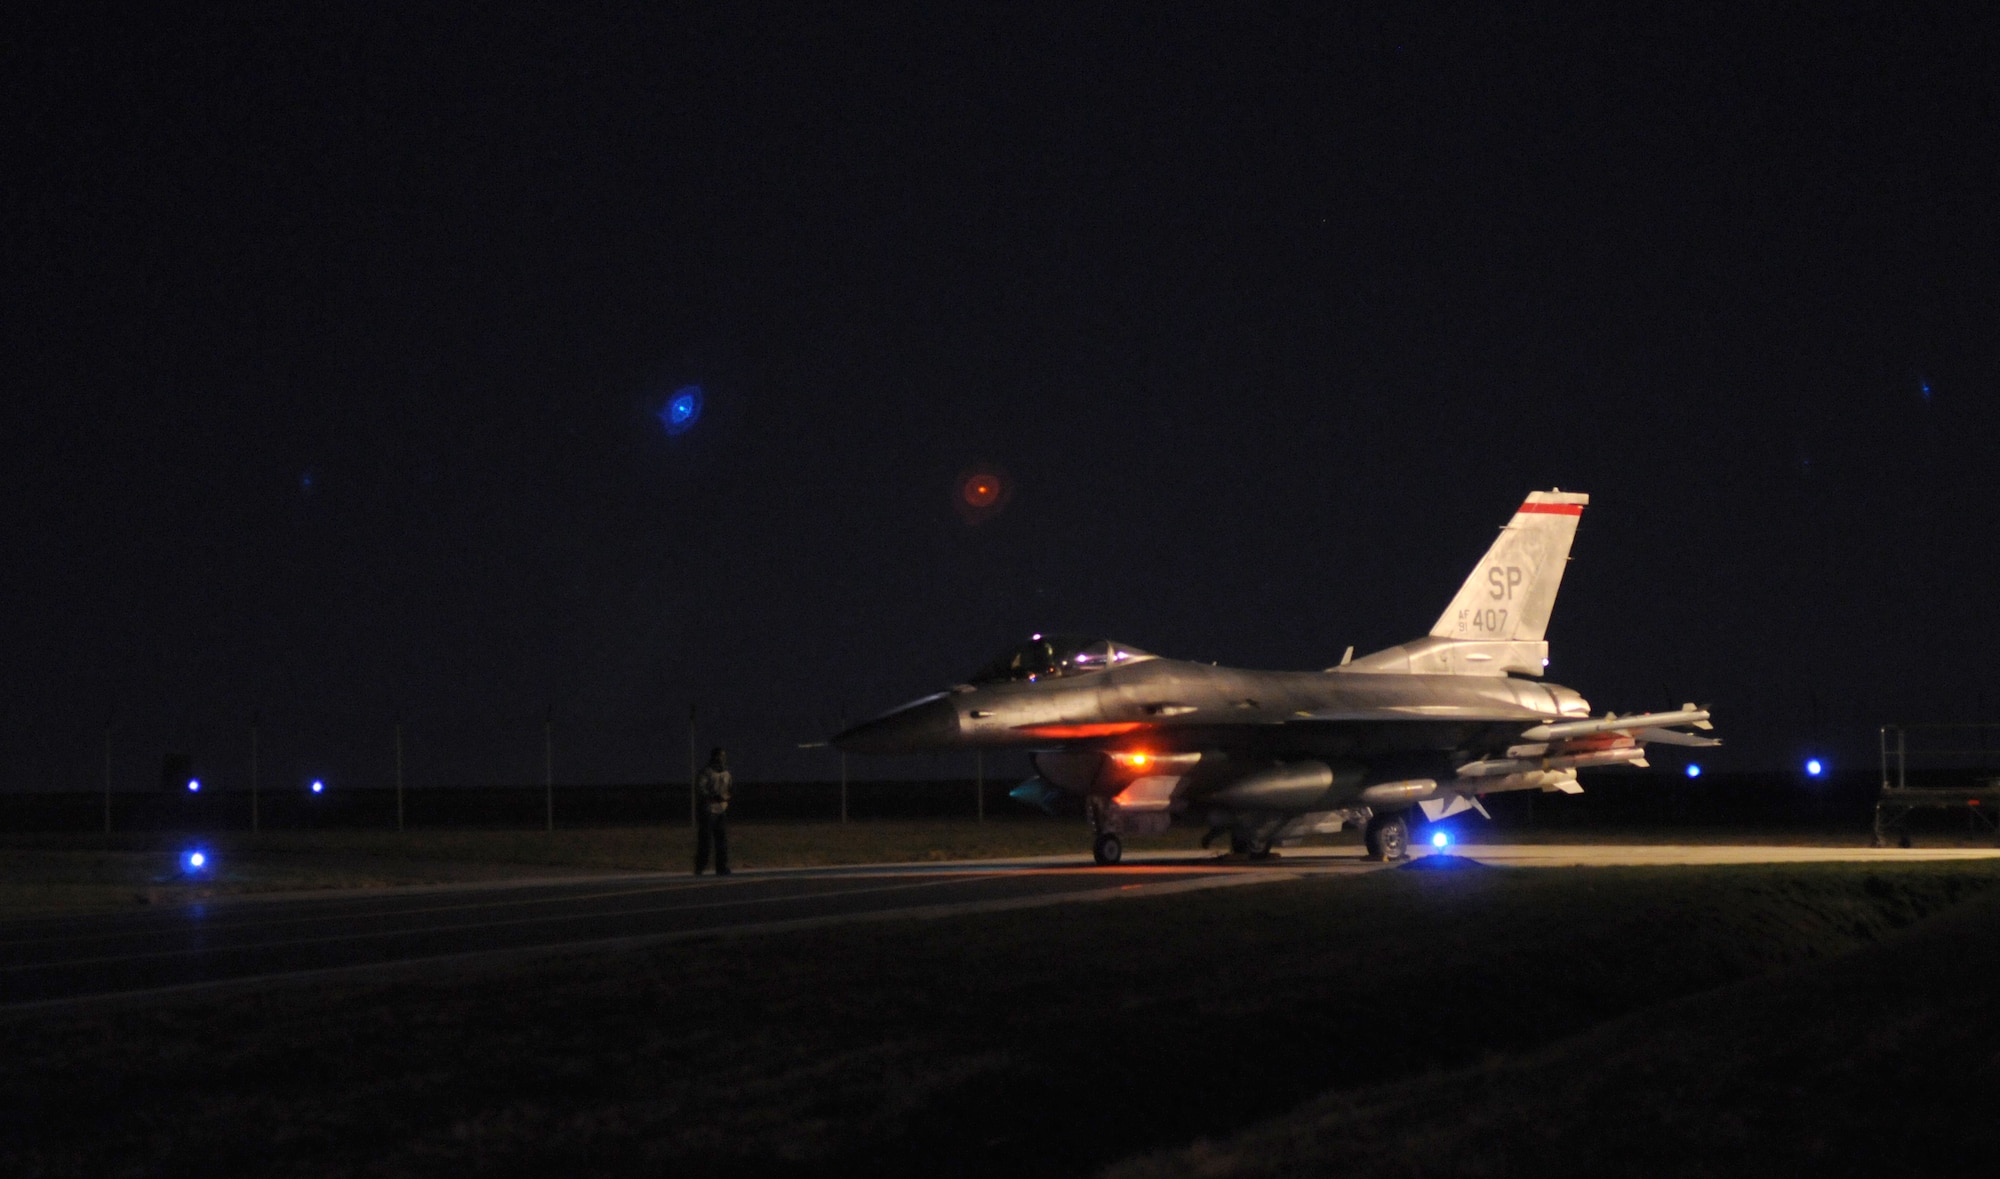 SPANGDAHLEM AIR BASE, Germany – An F-16 Fighting Falcon from the 480th Fighter Squadron prepares for take-off from Spangdahlem Air Base in support of Operation Odyssey Dawn March 19. Joint Task Force Odyssey Dawn is the U.S. Africa Command task force established to provide operational and tactical command and control of U.S. military forces supporting the international response to the unrest in Libya and enforcement of United Nations Security Council Resolution (UNSCR) 1973. UNSCR 1973 authorizes all necessary measures to protect civilians in Libya under threat of attack by Qadhafi regime forces.  JTF Odyssey Dawn is commanded by U.S. Navy Admiral Samuel J. Locklear, III. (U.S. Air Force photo/Senior Airman Nathanael Callon)